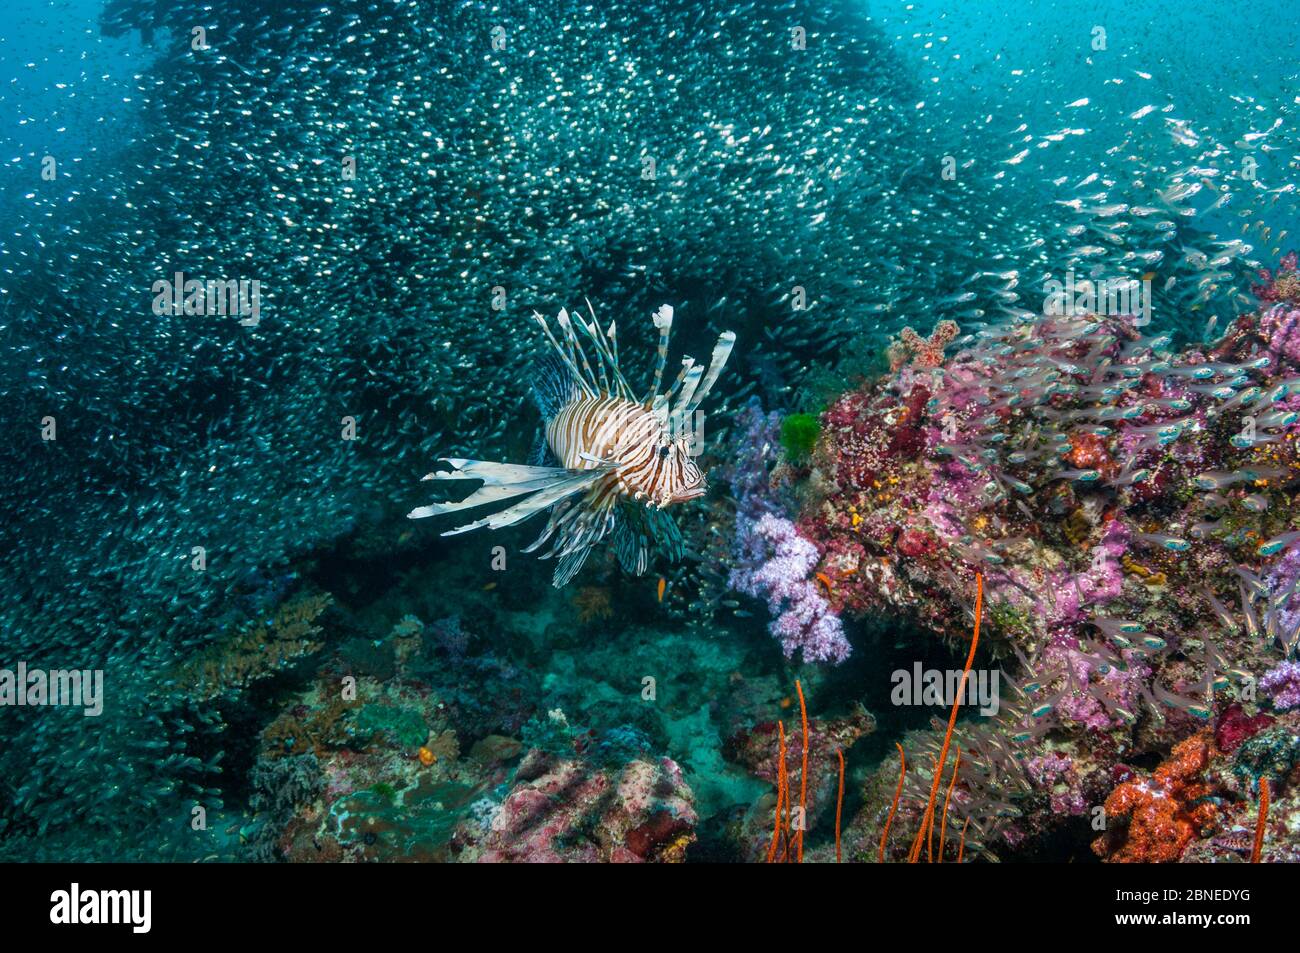 Lionfish (Pterois volitans) hunting Pygmy sweepers (Parapriacanthus ransonetti) Similian Islands, Andaman Sea, Thailand. Stock Photo